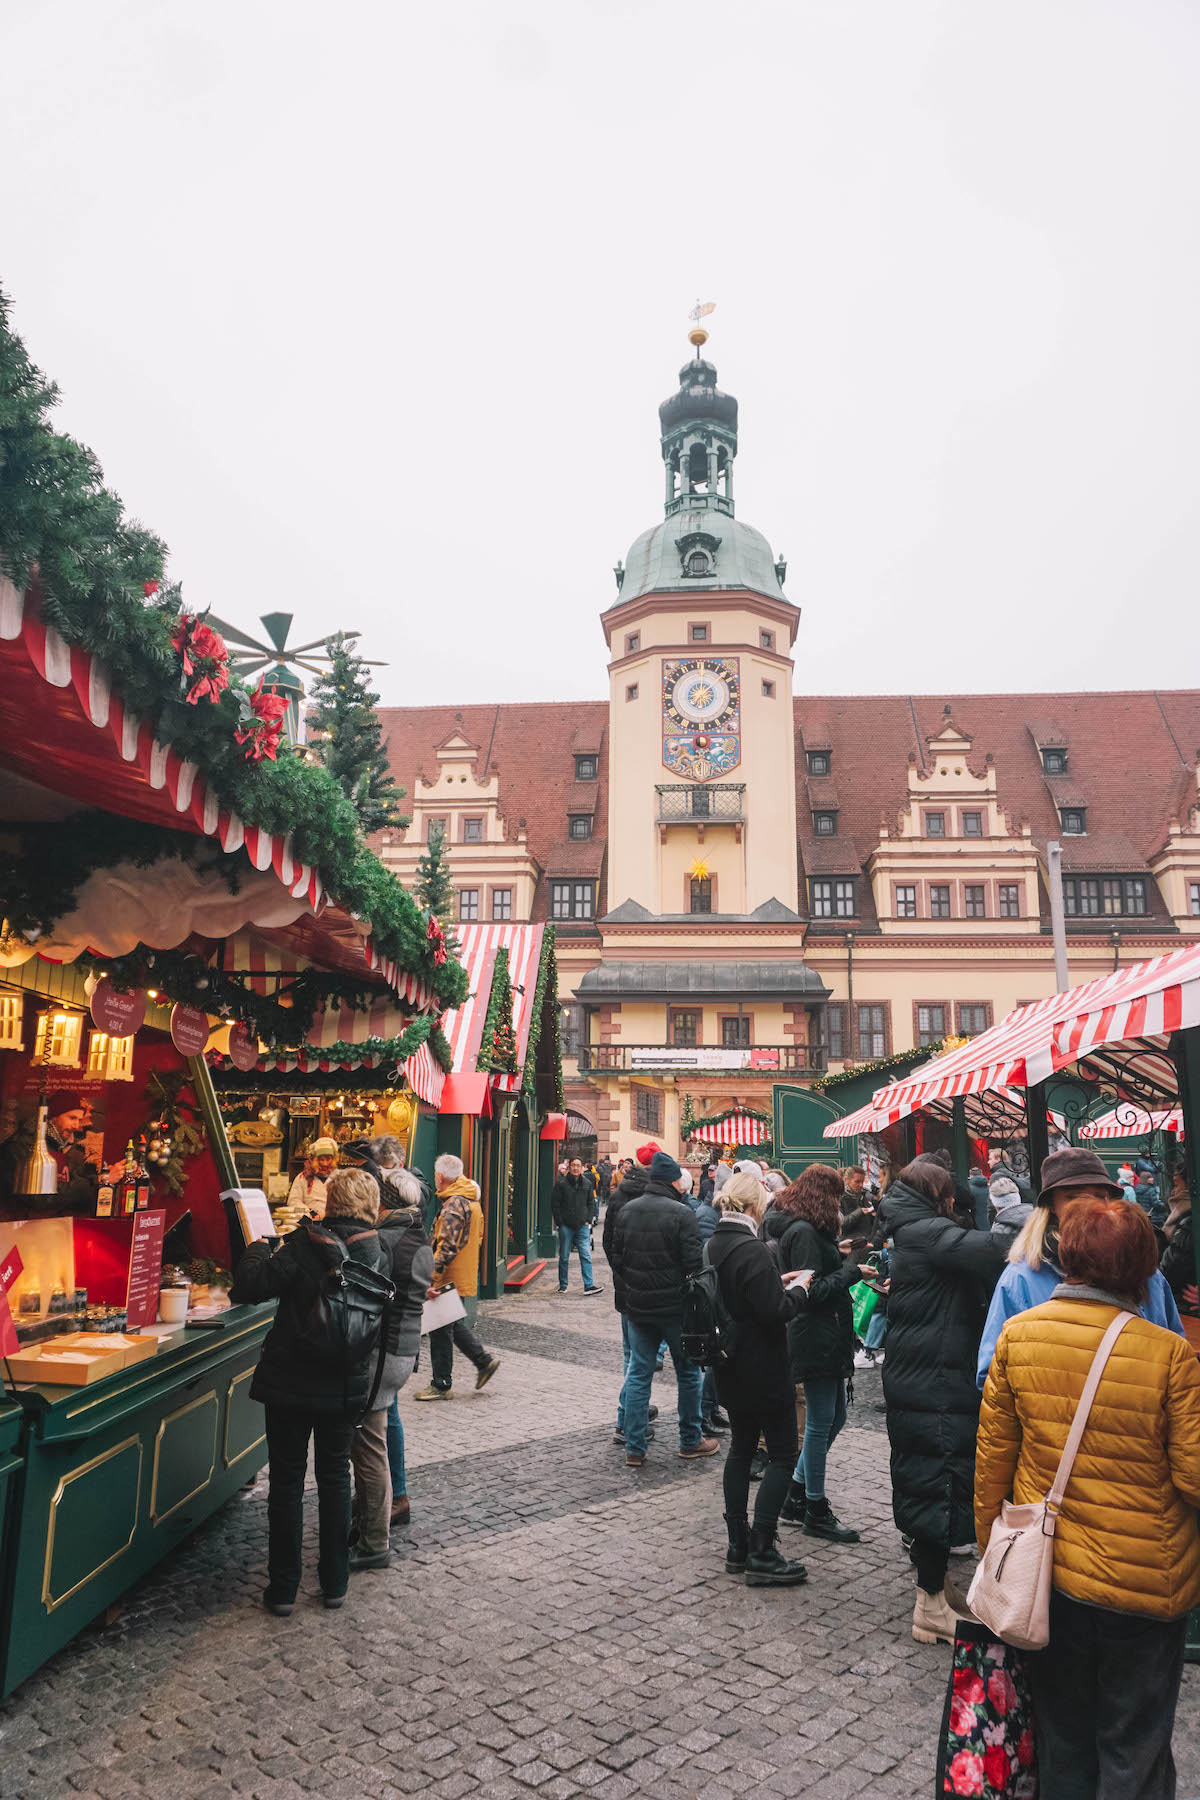 Christmas market stalls in front of Leipzig's town hall